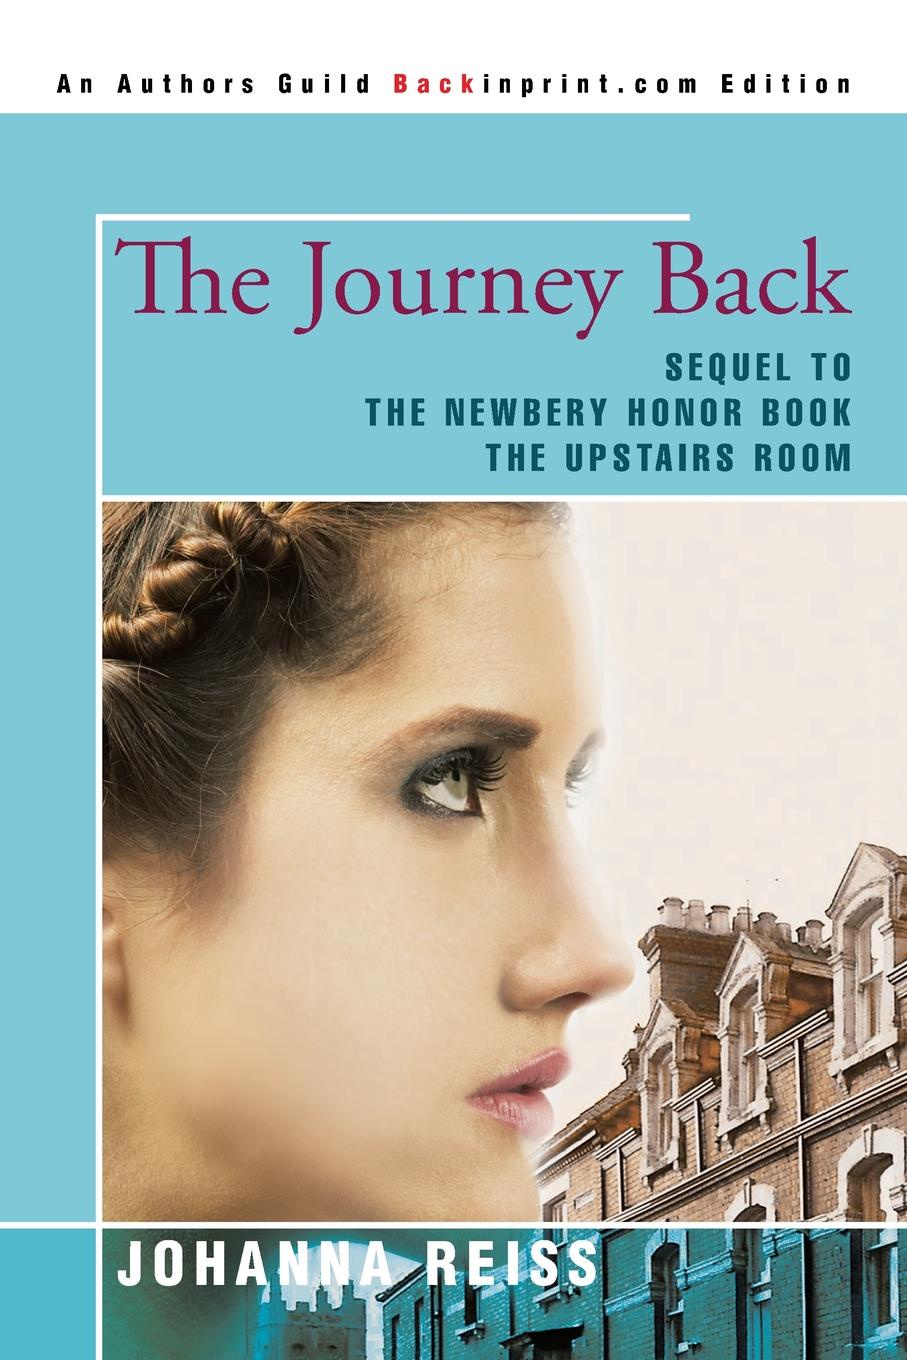 The Journey back. Upstairs Room by Johanna Reiss. Sequel - back (2007). Back journey